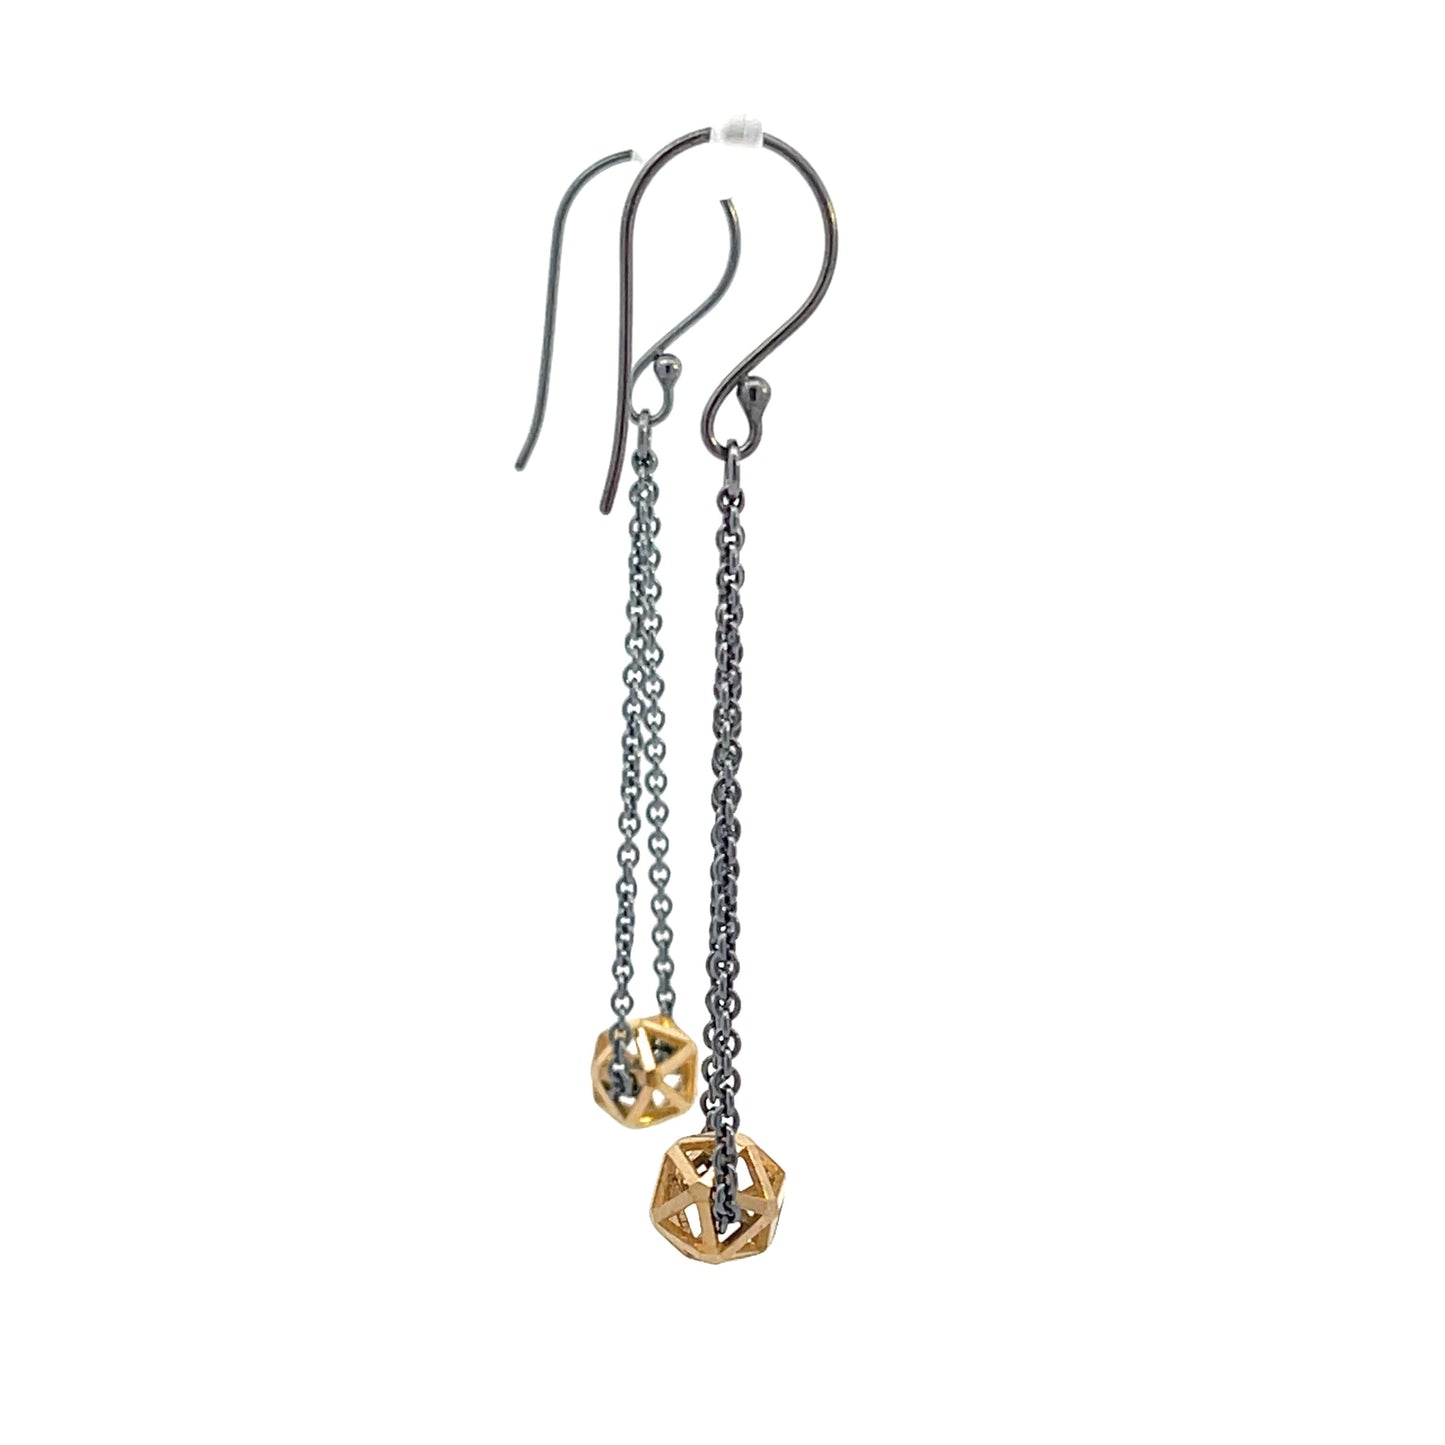 Oxidized Sterling Silver Drop Earrings with Gold-plated Isohedrons